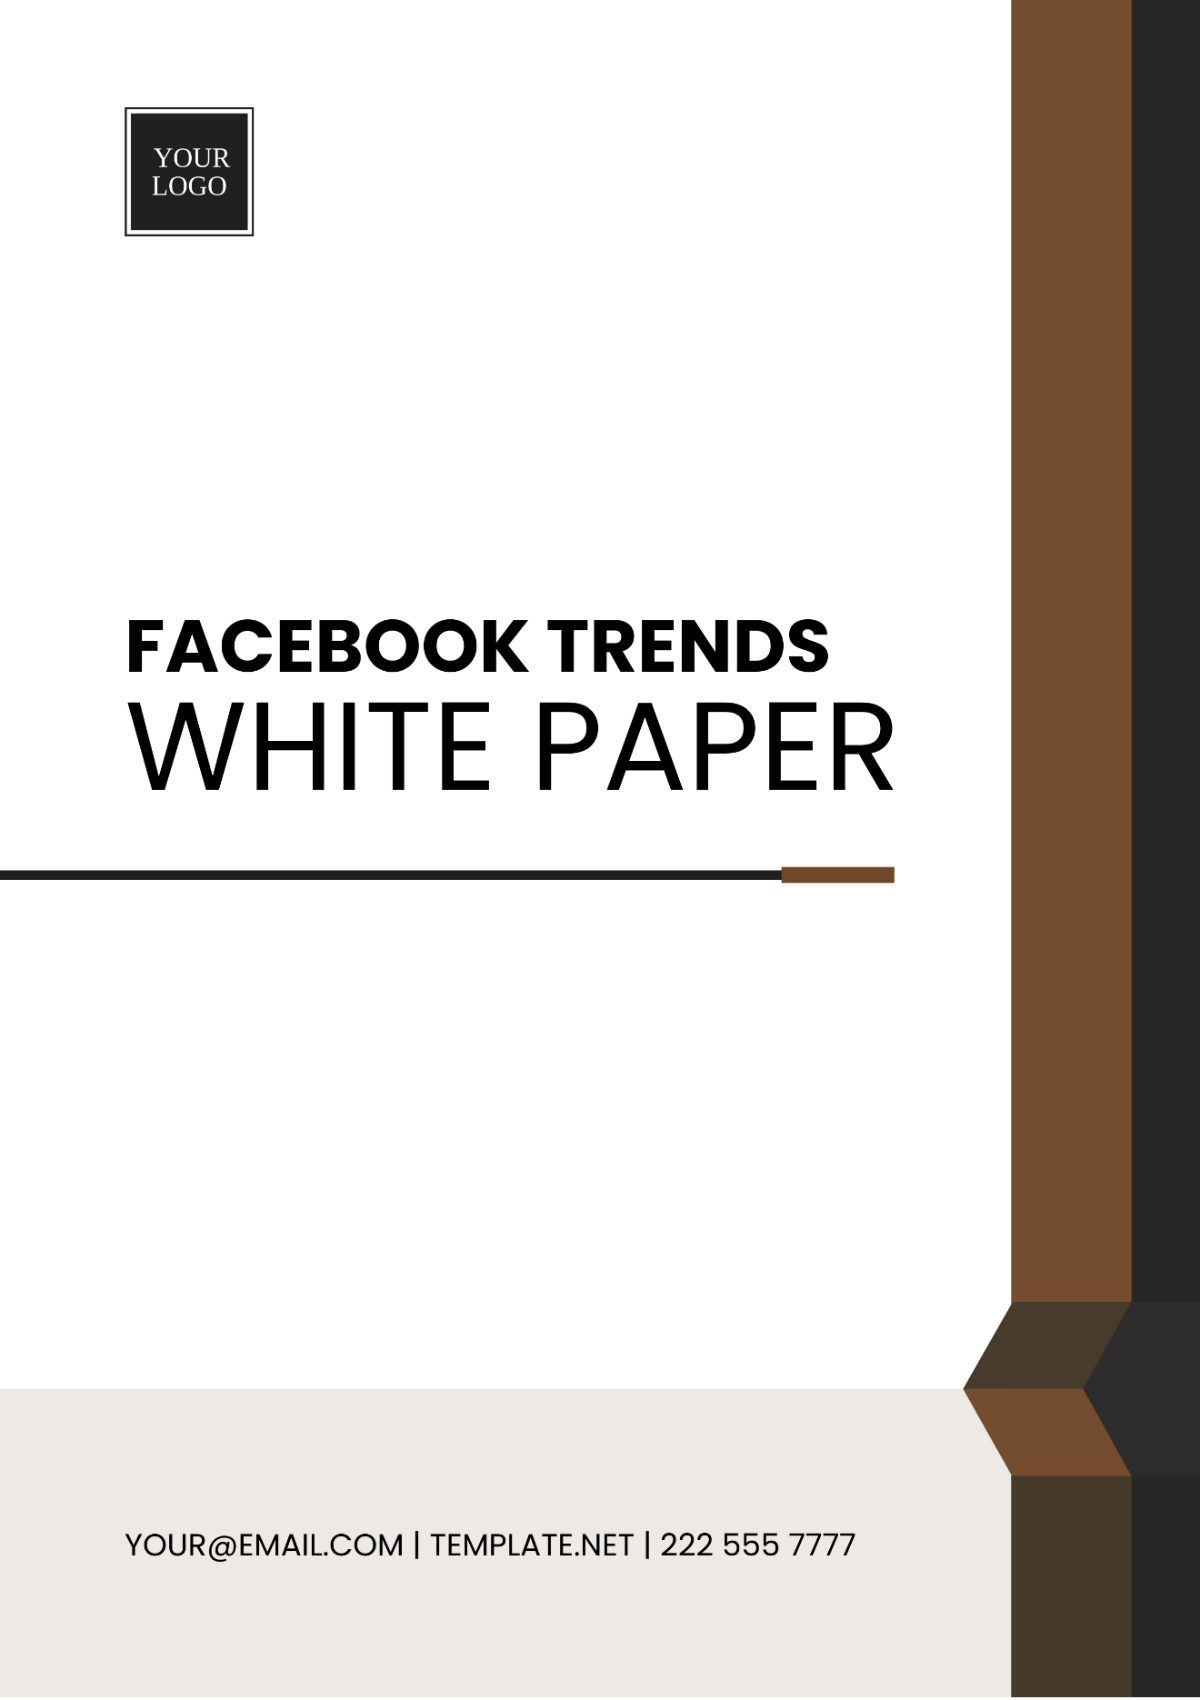 Facebook Trends White Paper Template